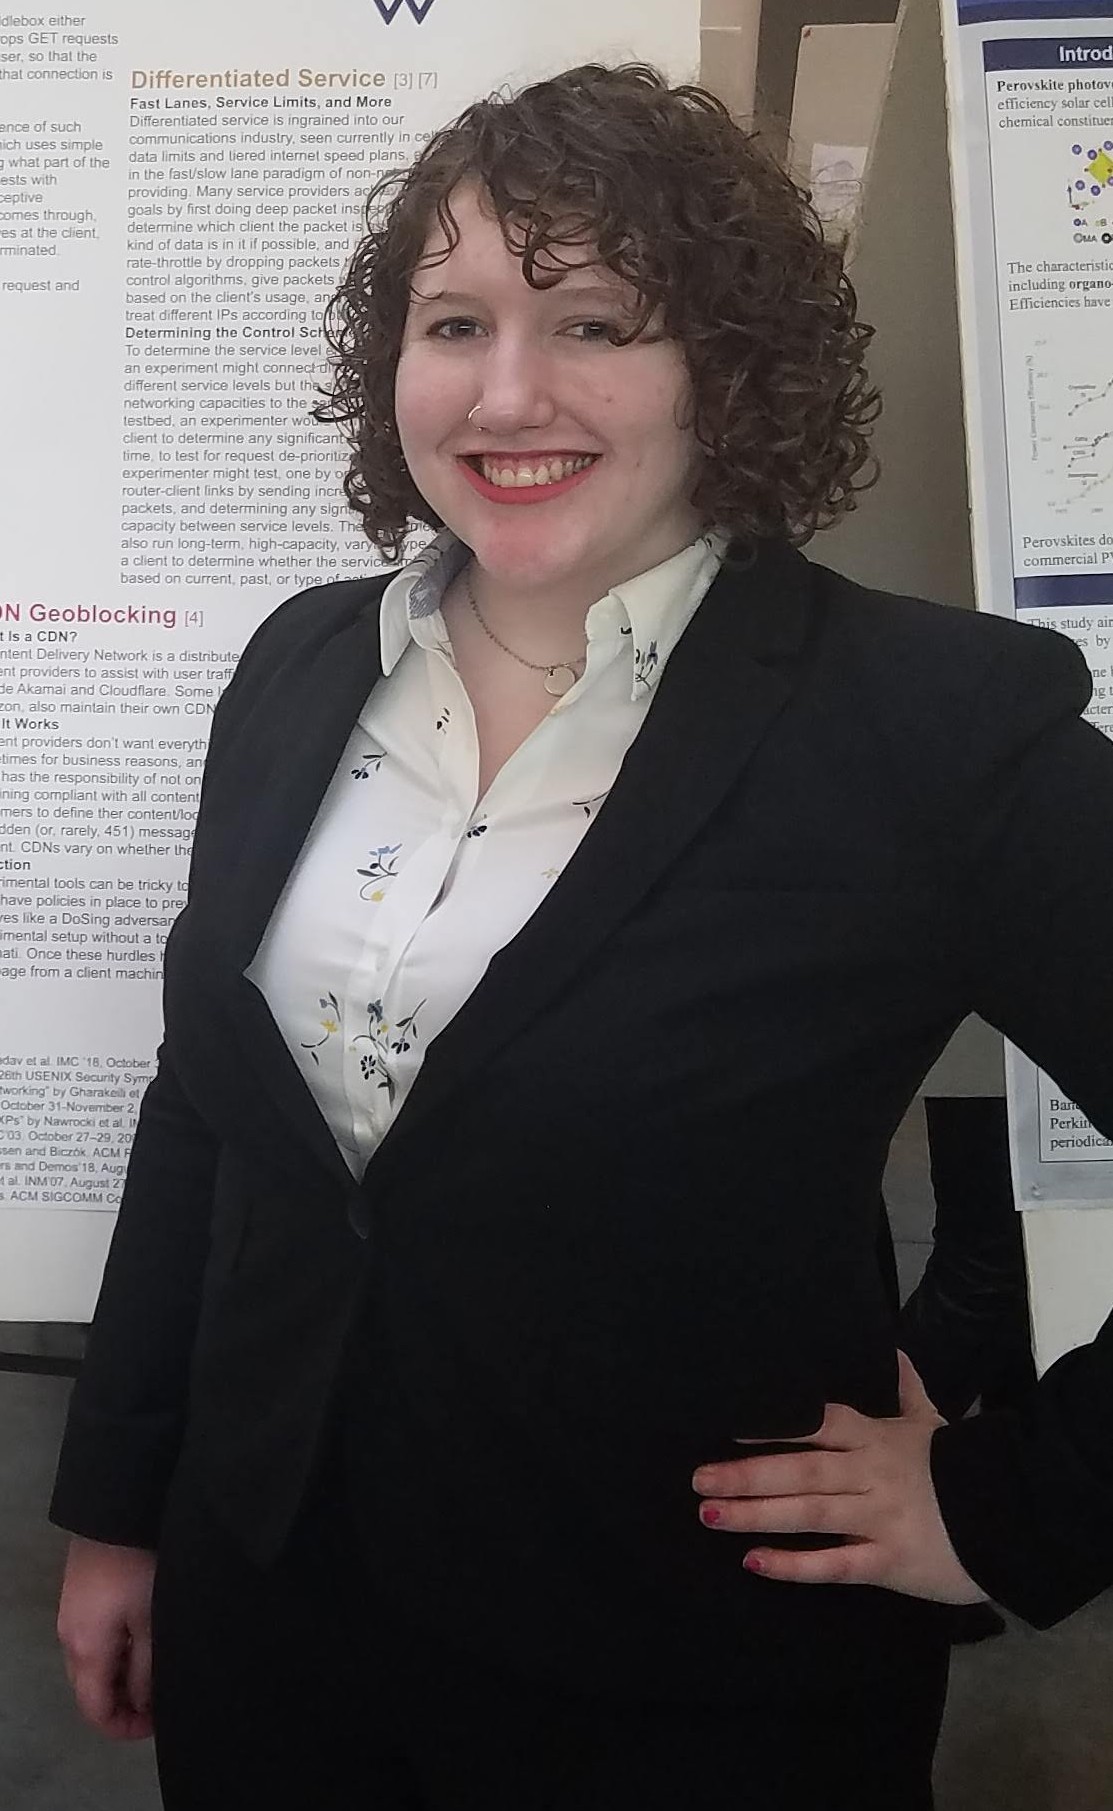 Allison smiles at the camera with her hand on her hip, standing in front of two research posters. She is wearing a dark suit and a white collared blouse sparsely patterned with blue flowers.